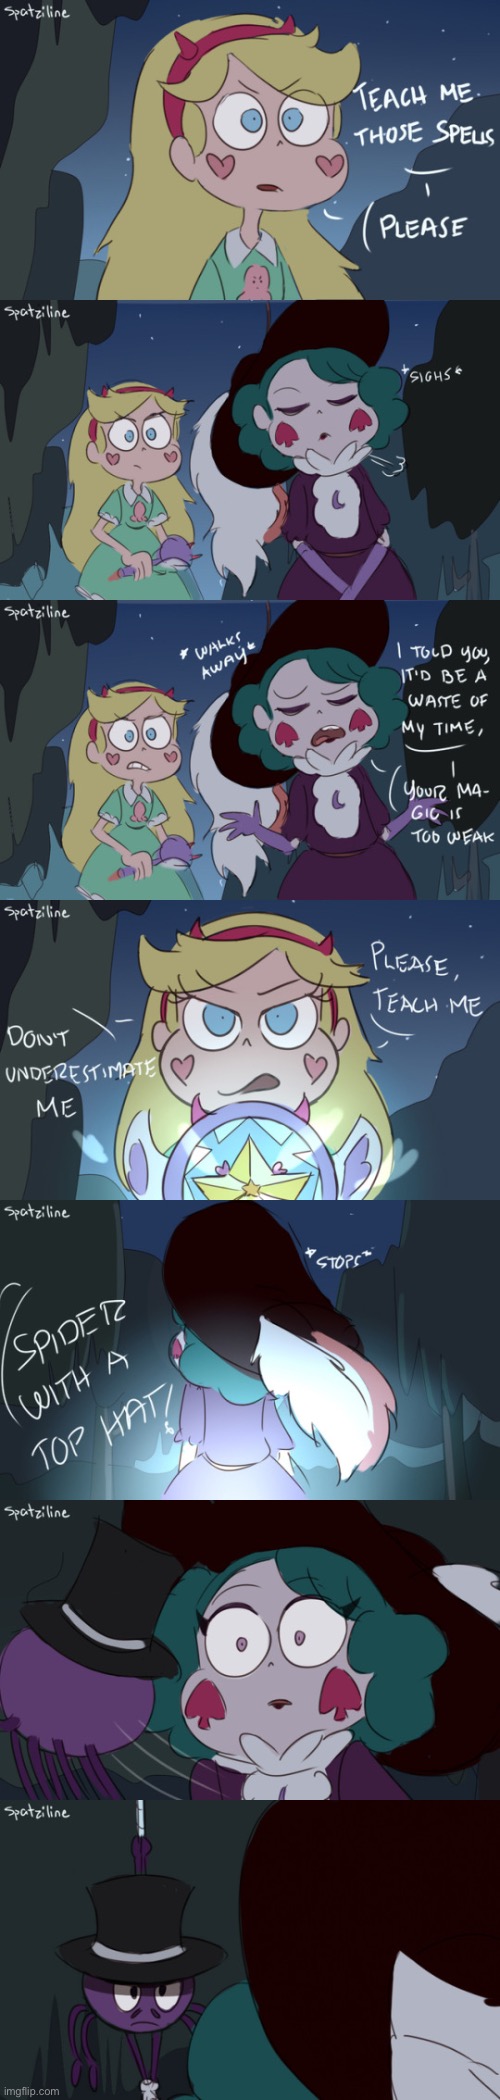 Spatziline - Showing Off | image tagged in memes,comics,svtfoe,star vs the forces of evil,comics/cartoons,funny | made w/ Imgflip meme maker